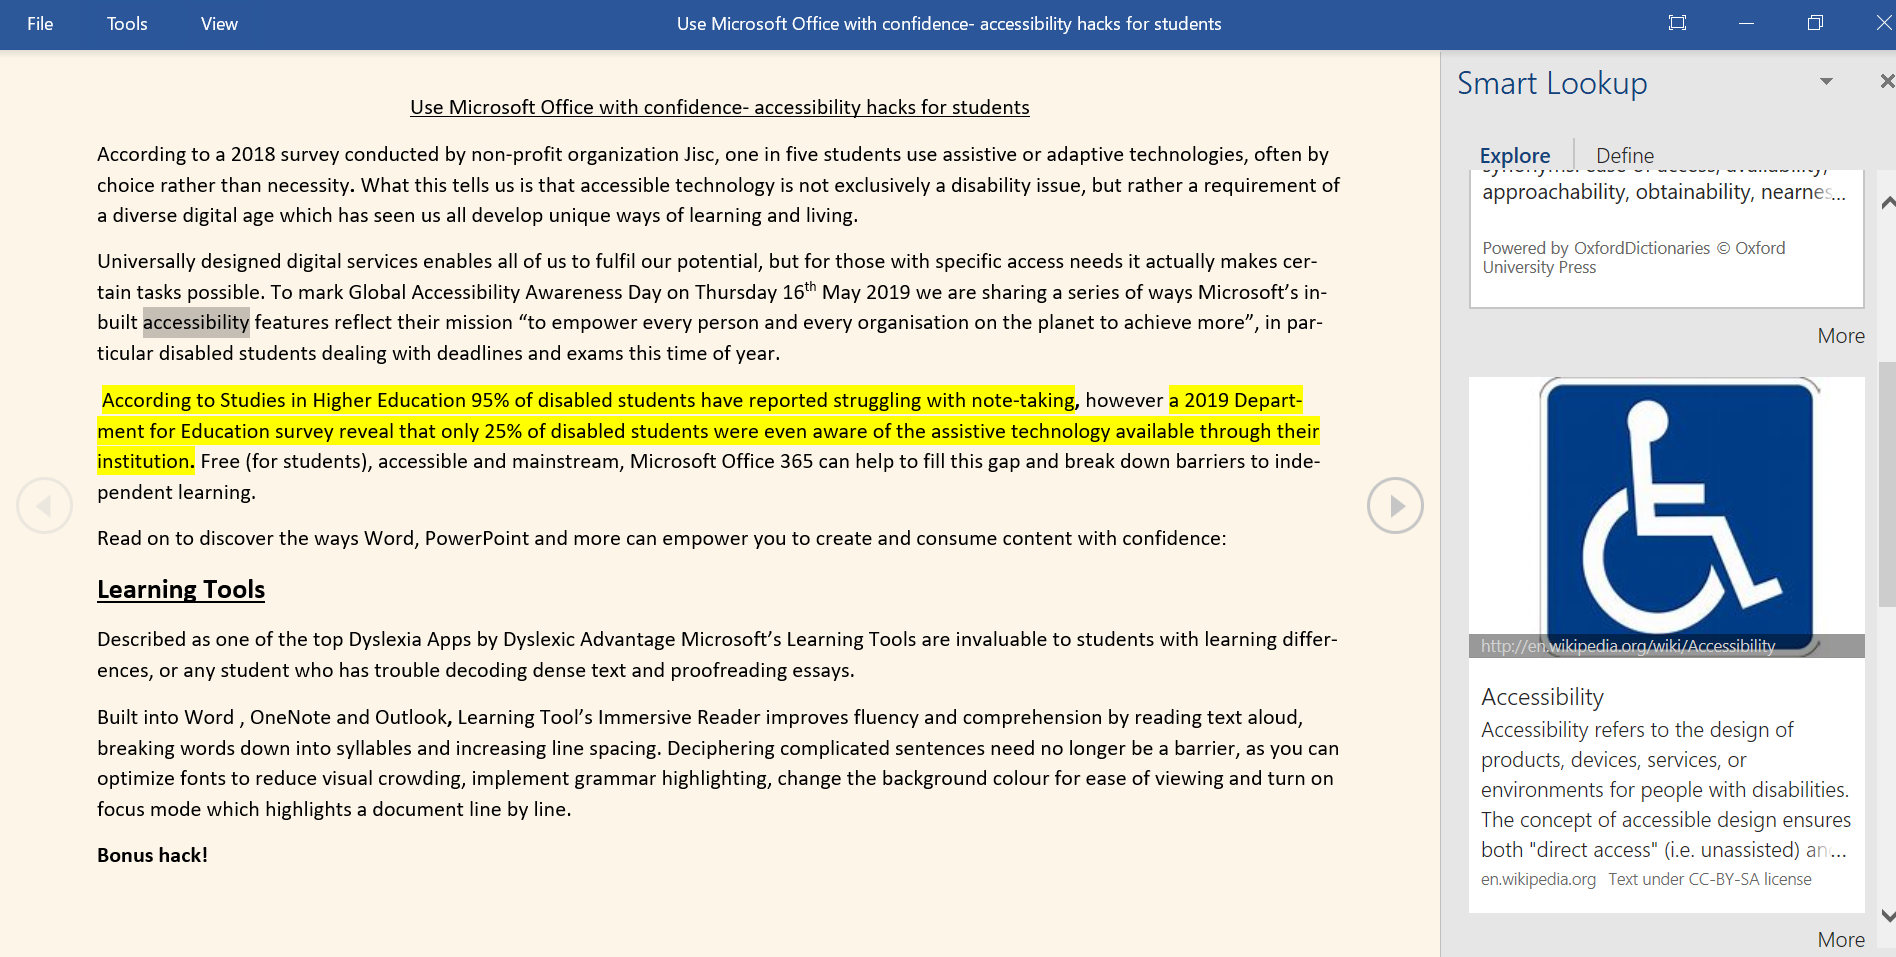 Screen grab showing read mode in Word with selection of tools